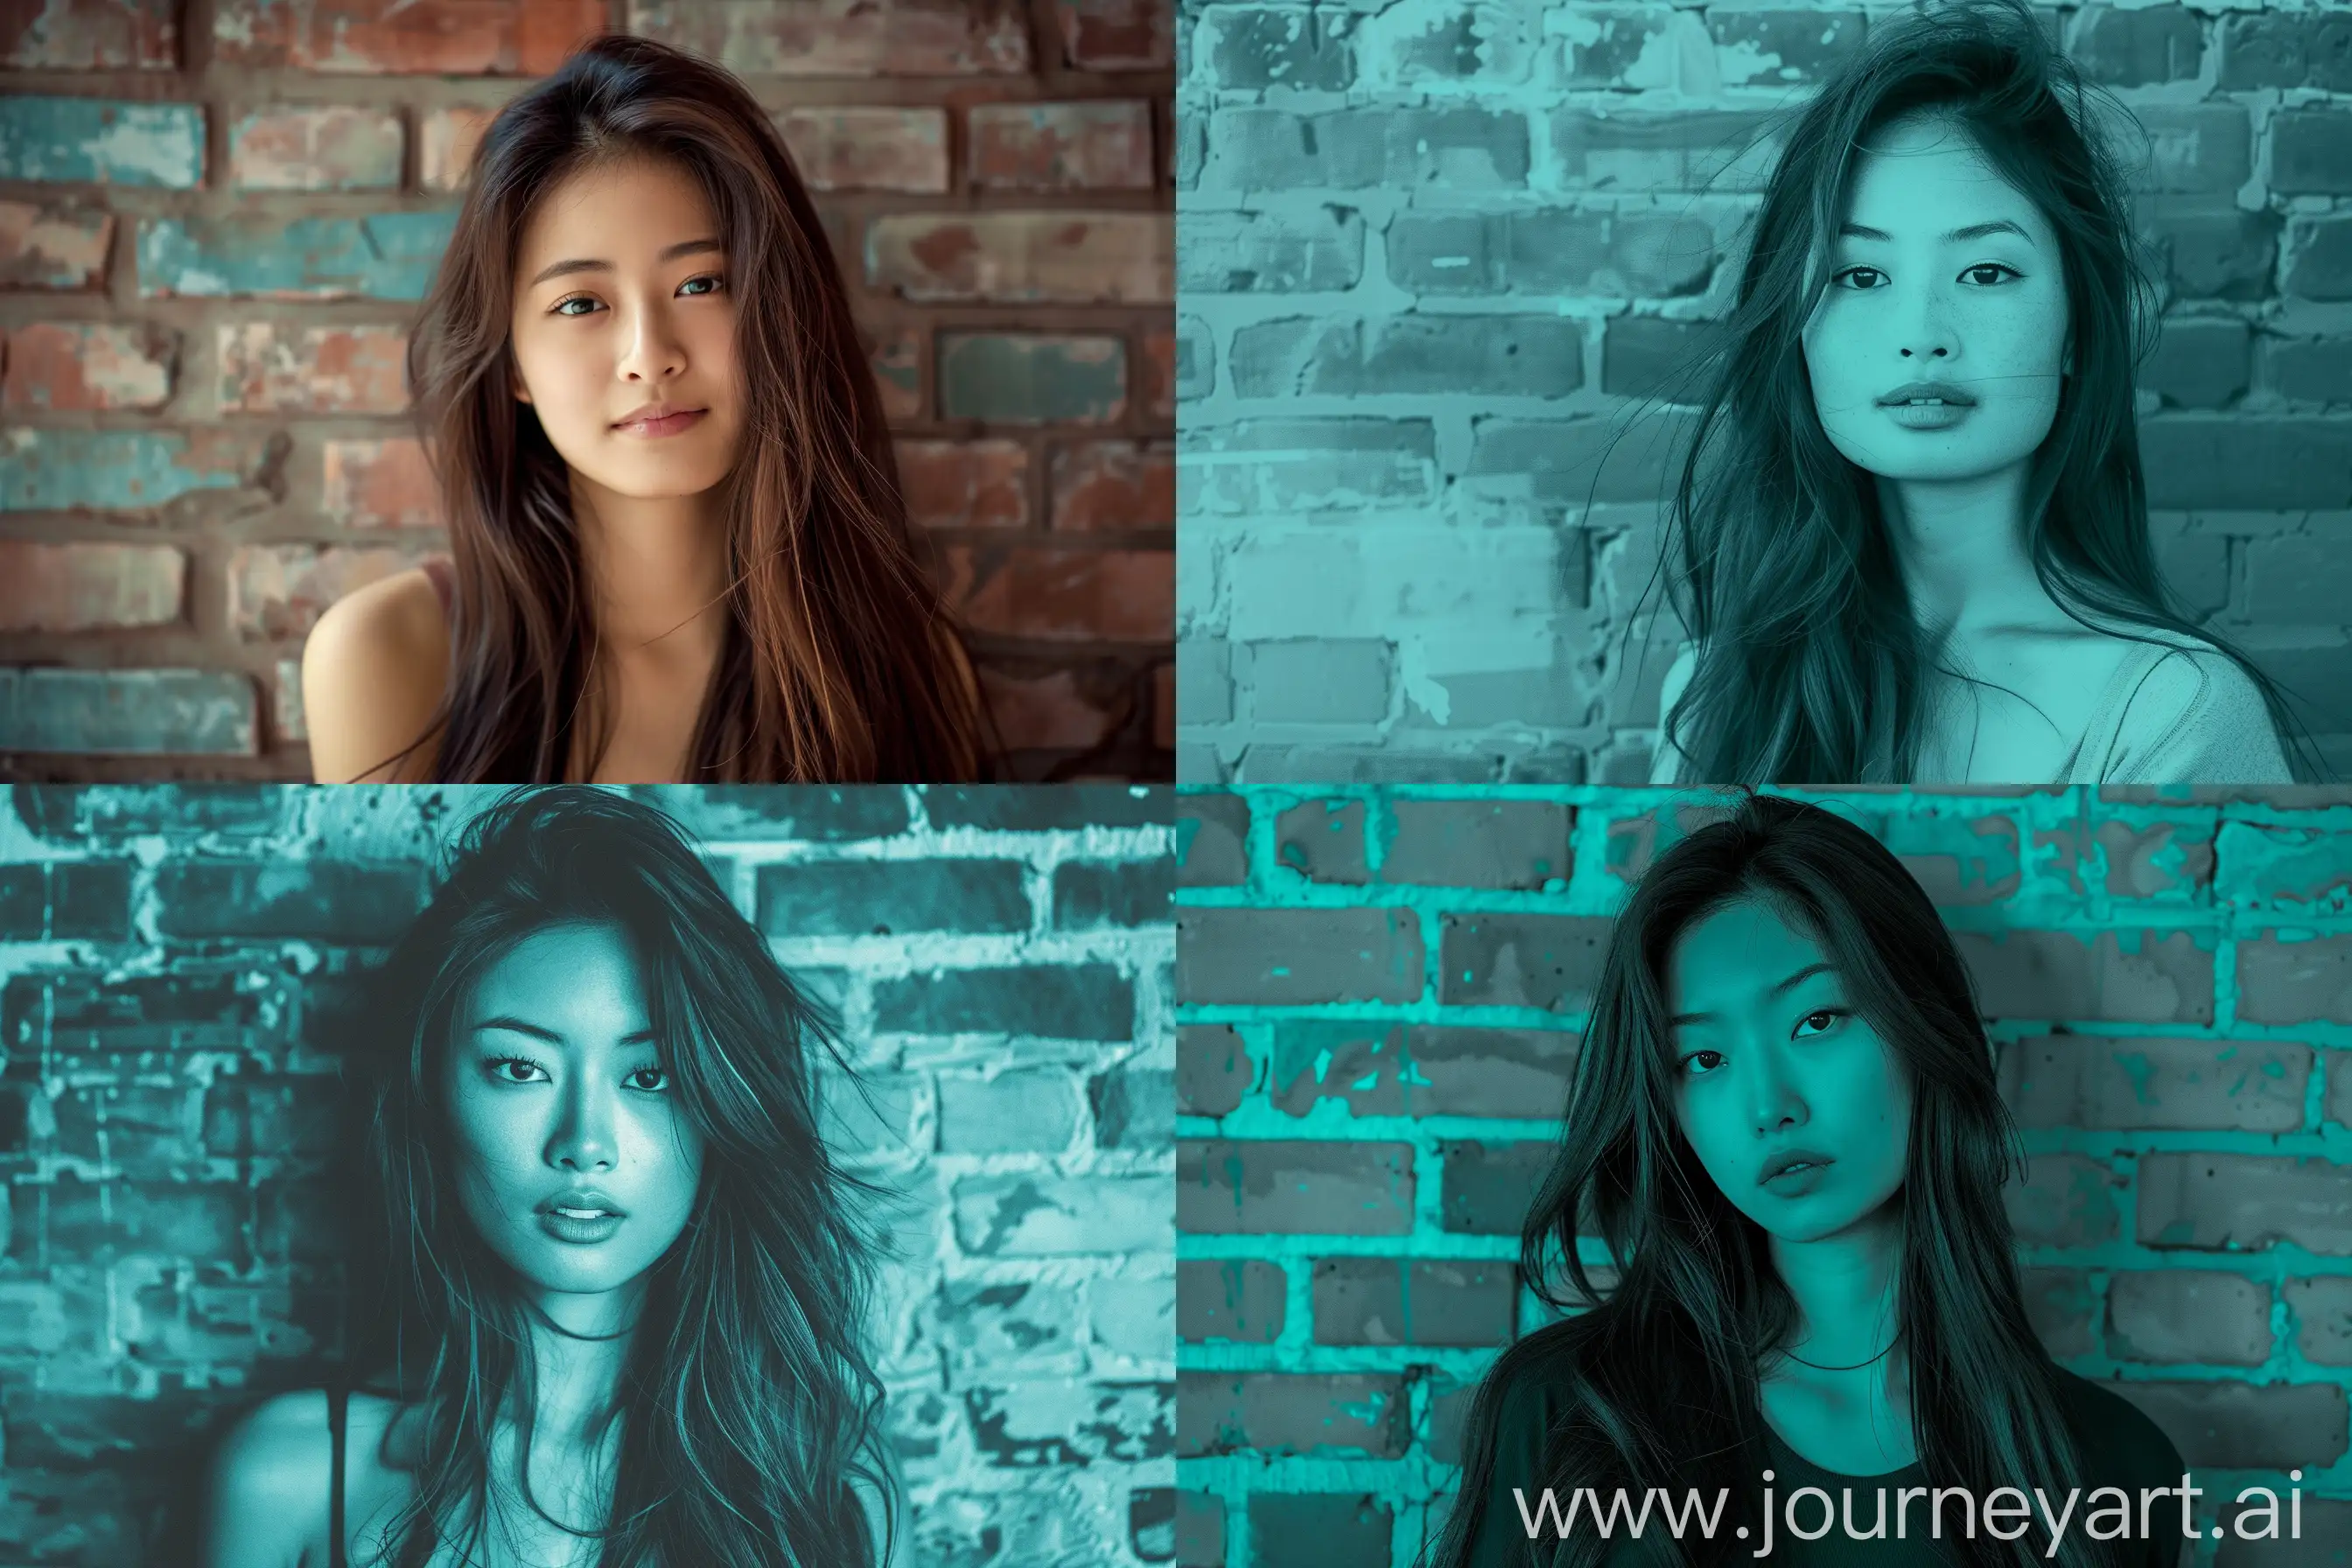 AsianInspired-Poetcore-Vibrant-Woman-with-Strong-Expression-Against-Brick-Wall